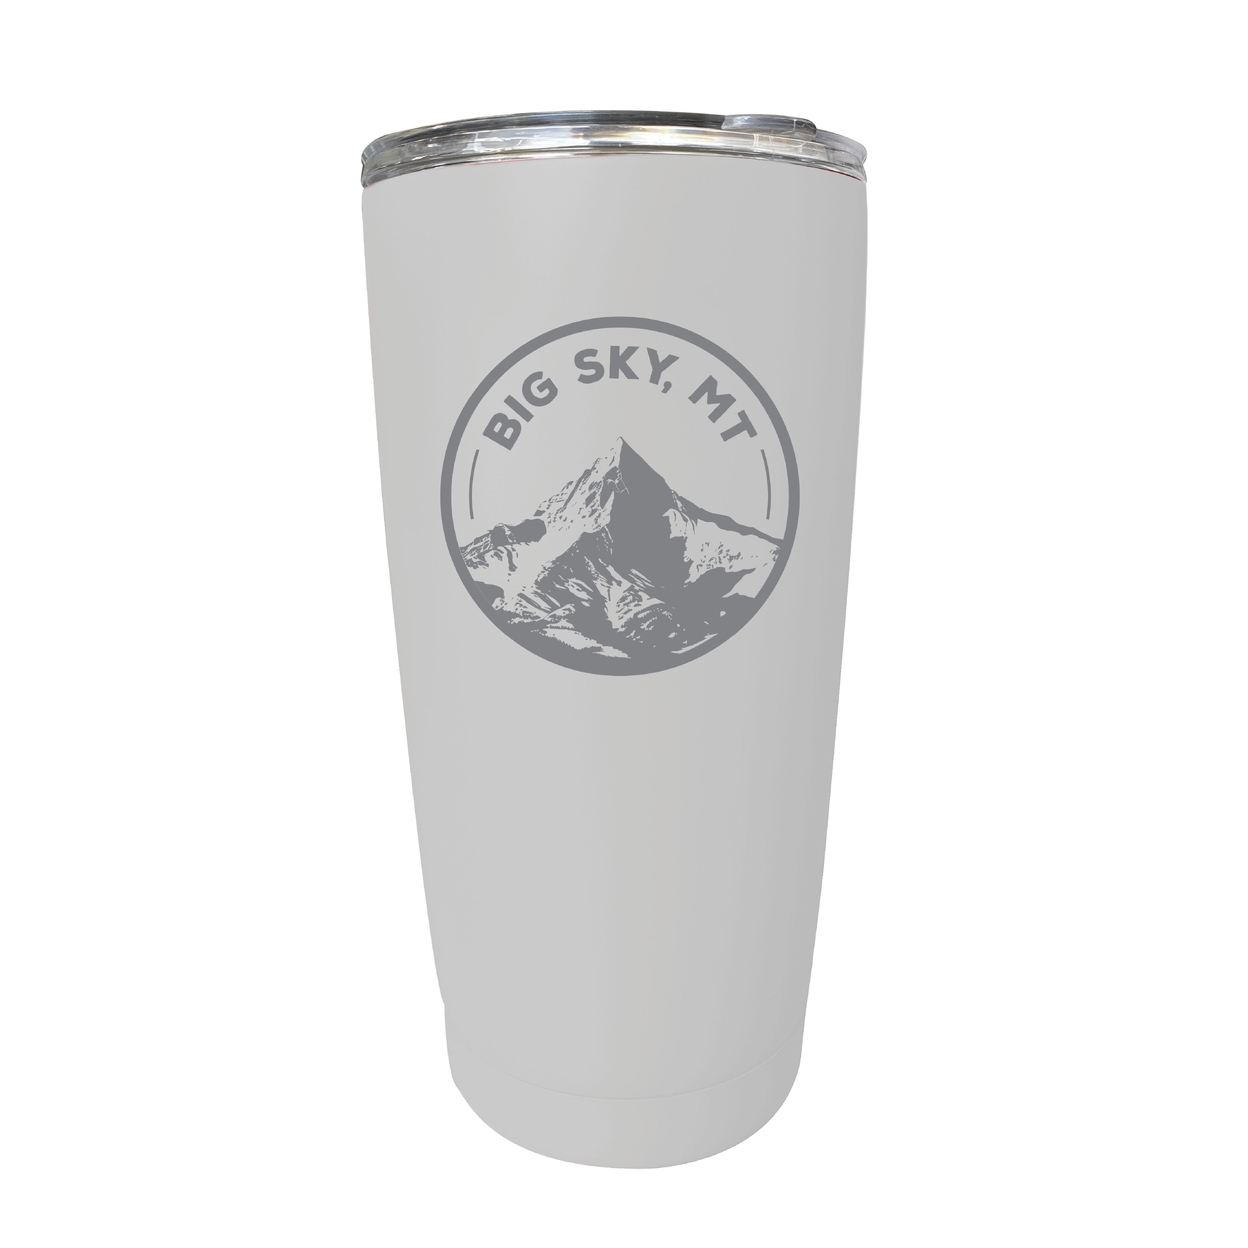 Big Sky Montana Souvenir 16 Oz Engraved Stainless Steel Insulated Tumbler - Purple,,4-Pack